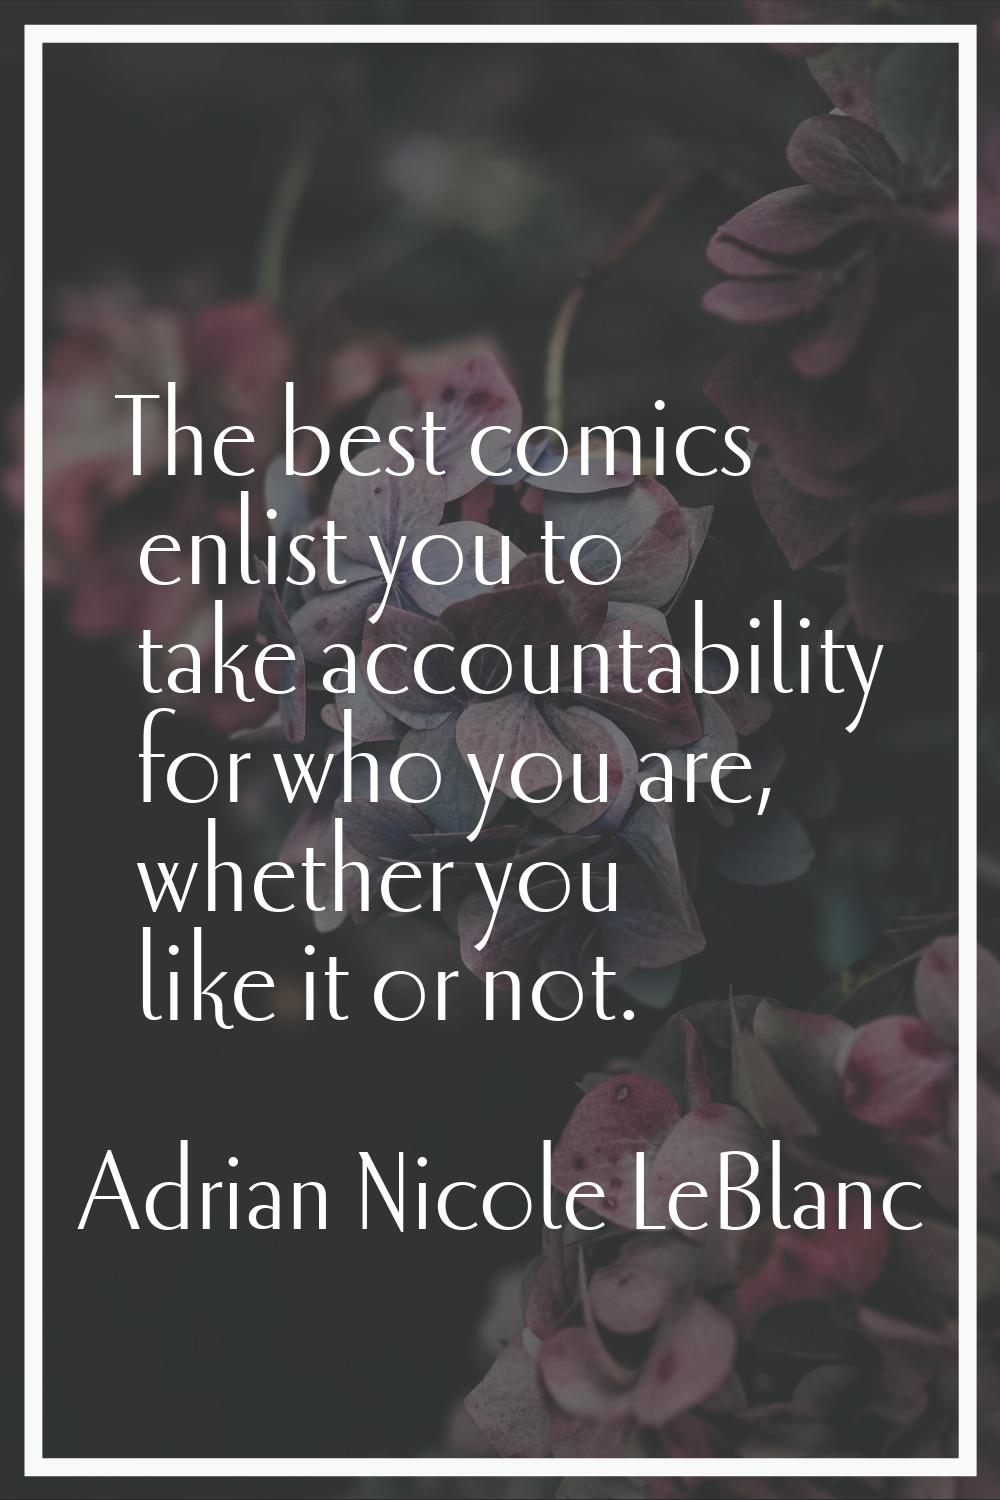 The best comics enlist you to take accountability for who you are, whether you like it or not.